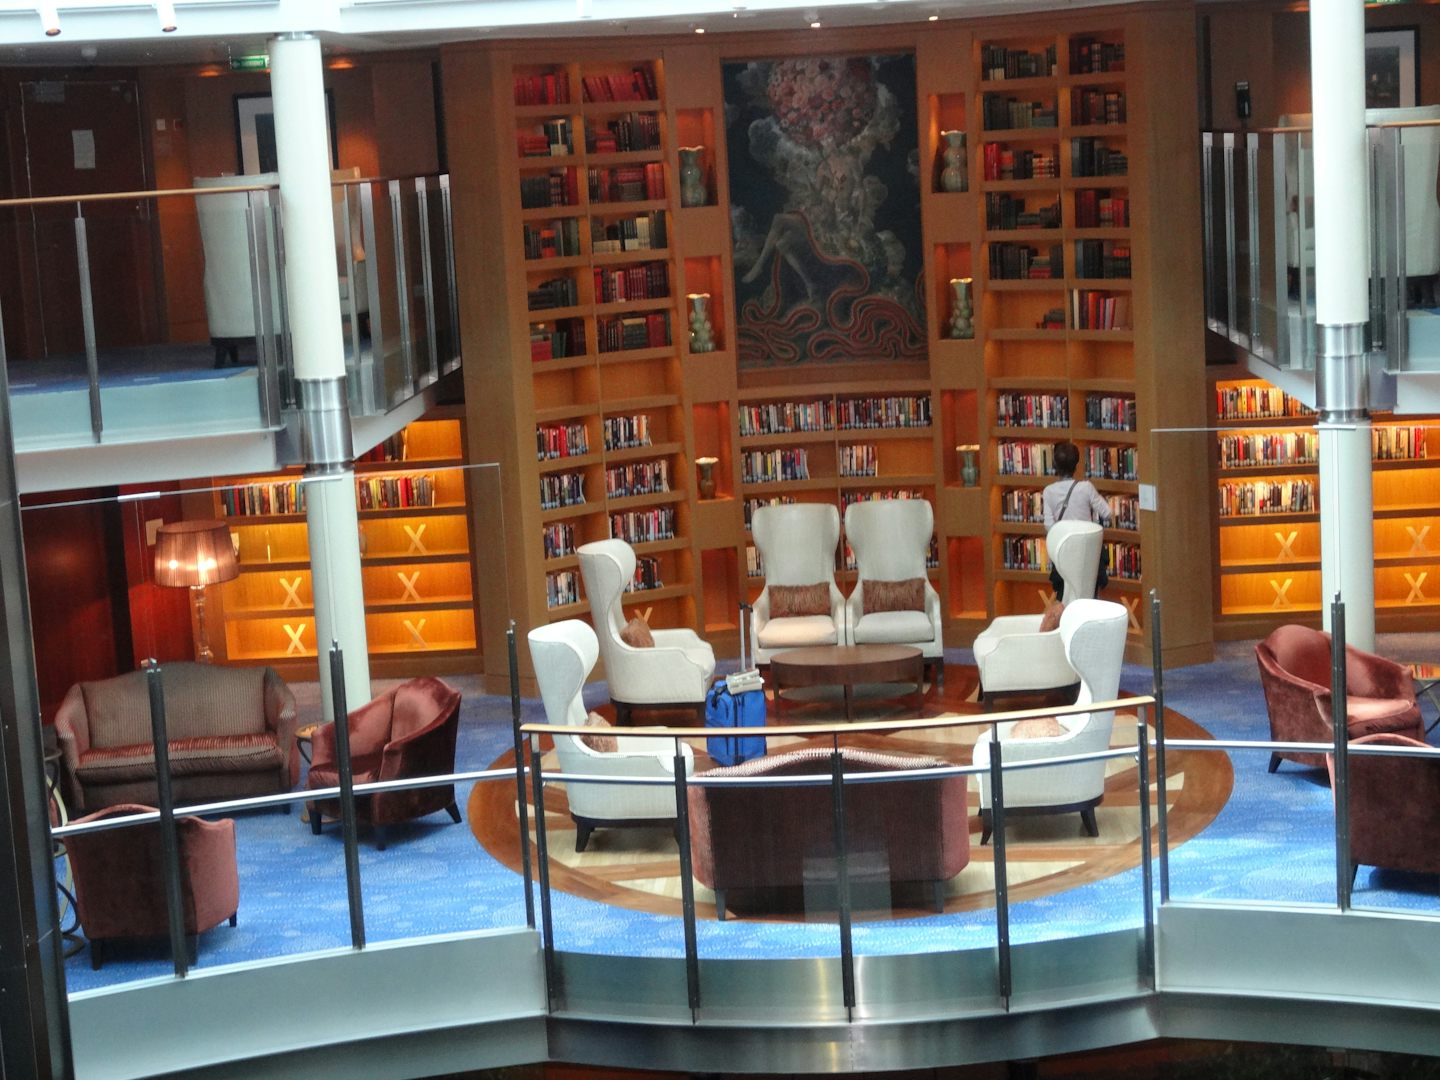 Celebrity Equinox Library taken from open glass elevator.  Stunningly beaut